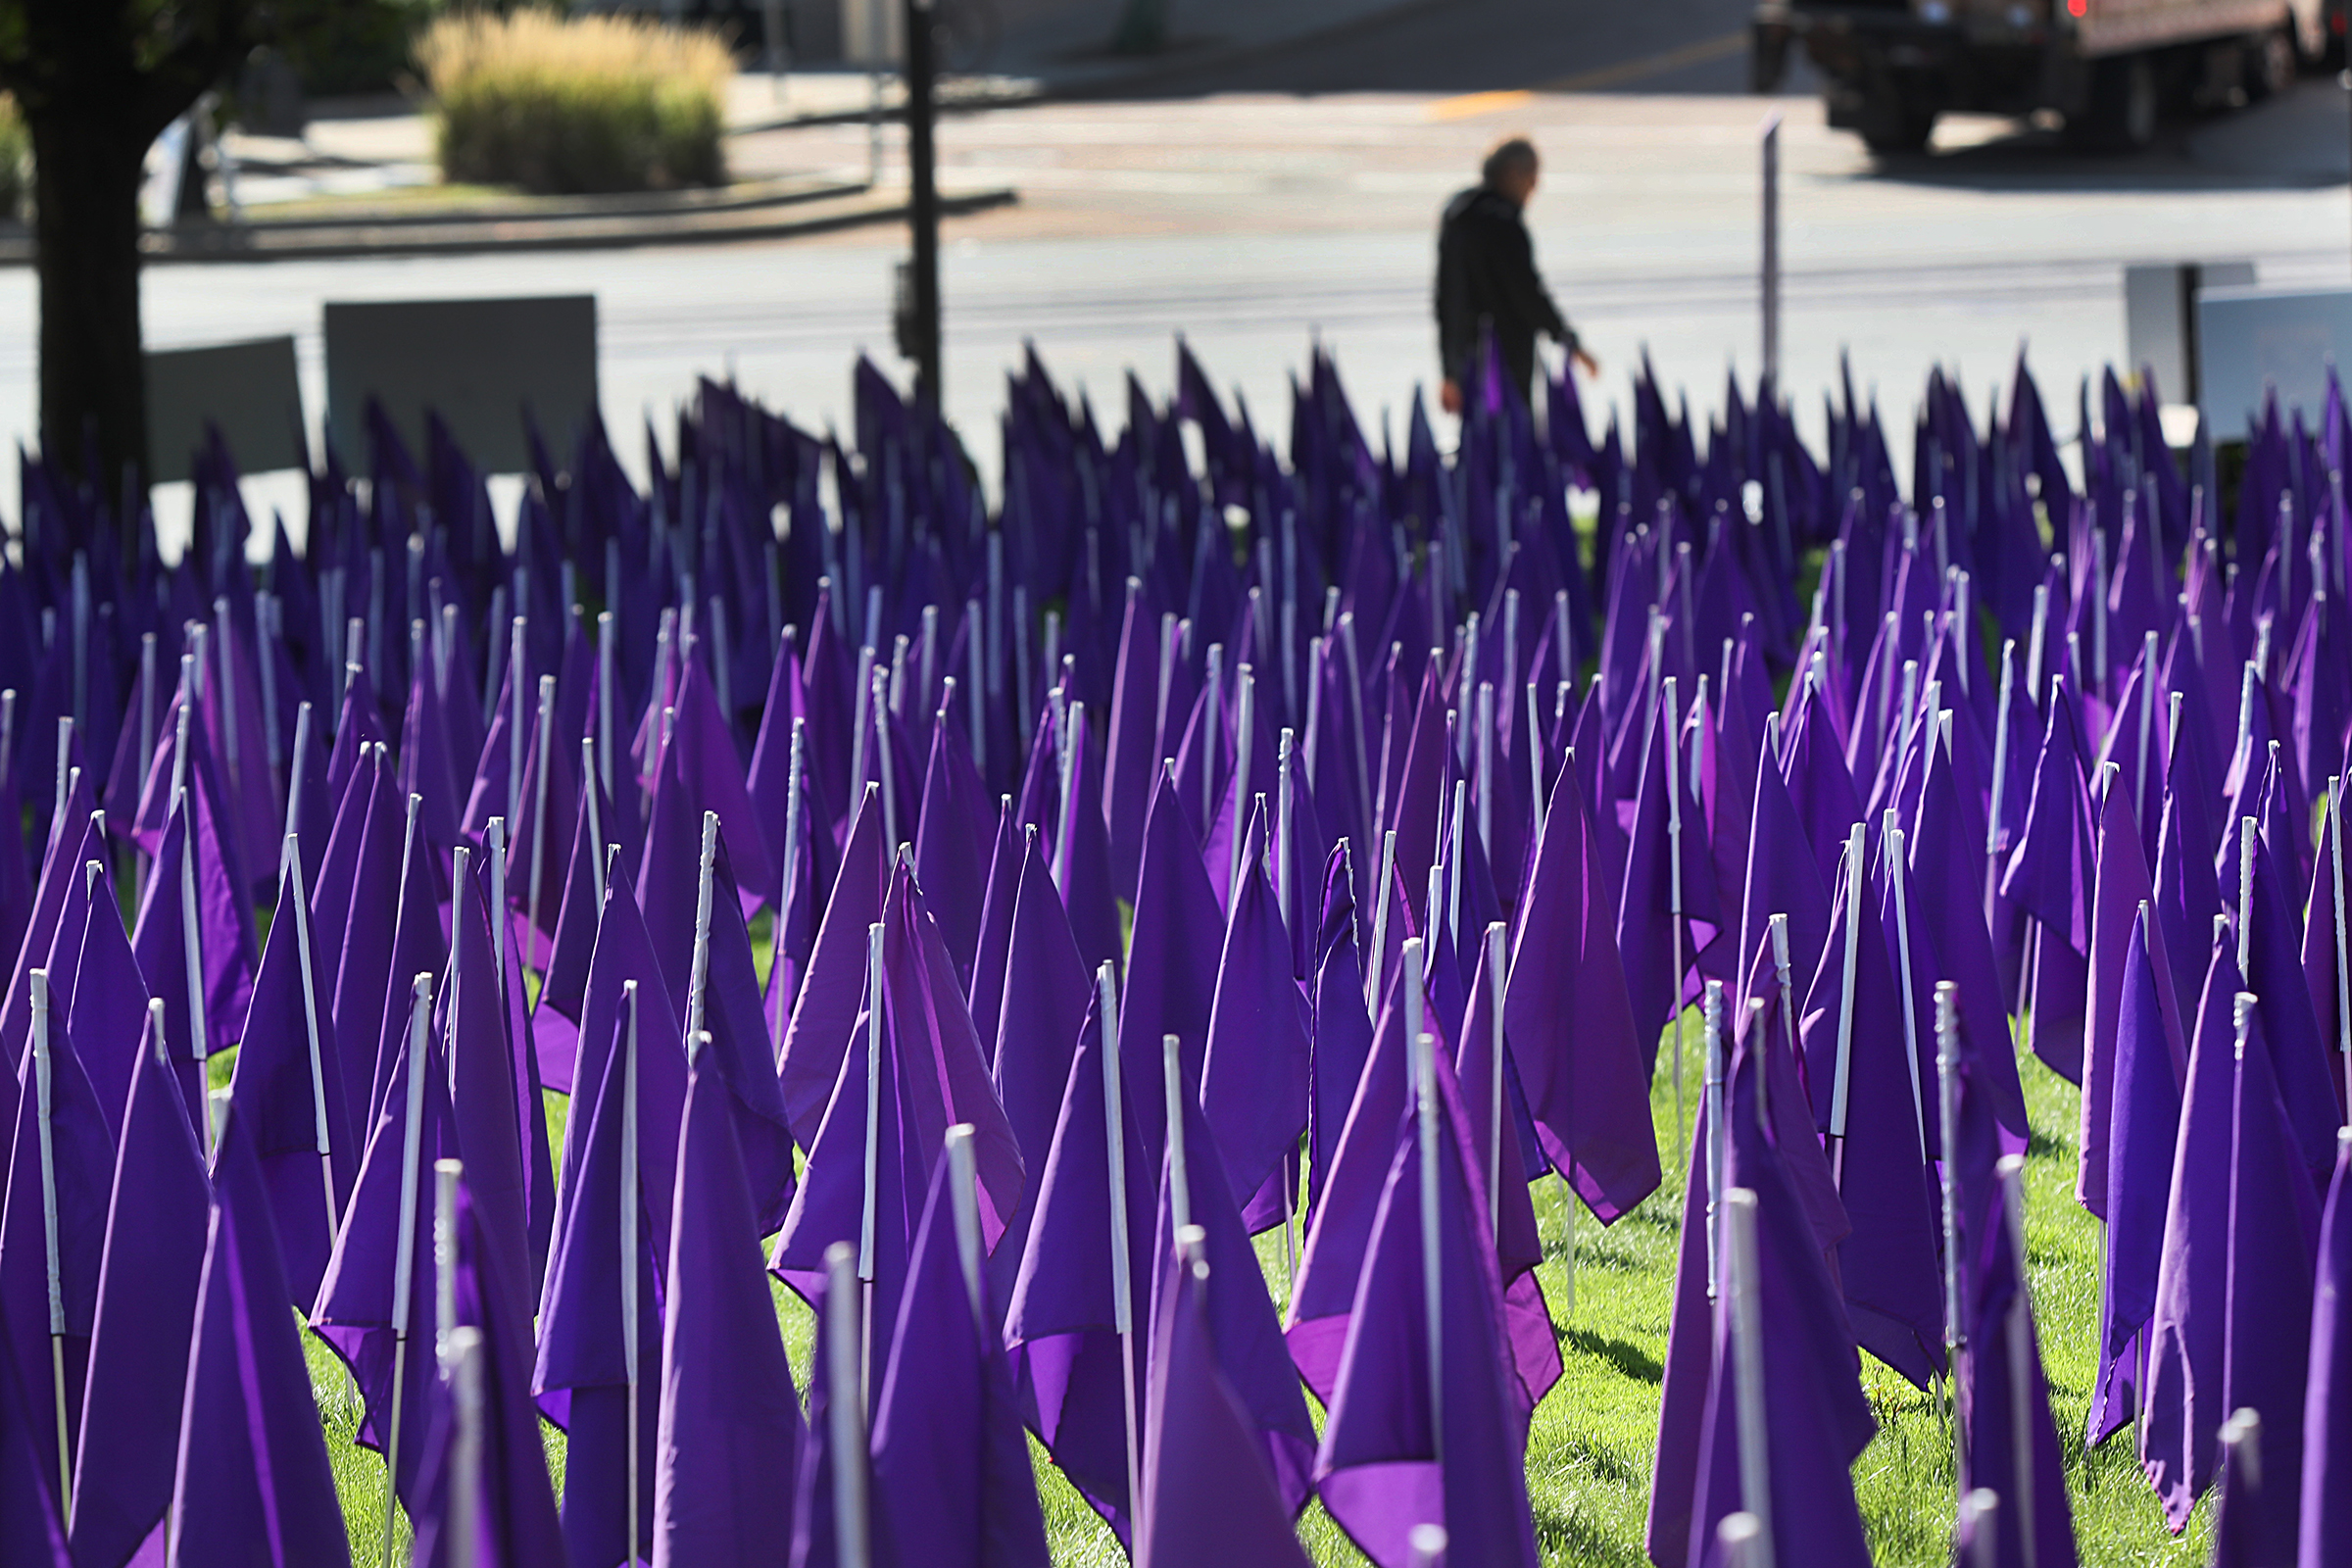 Brigham and Womens Hospital  observed National Recovery Month in September with a two-week-long arrangement of 2,104 purple flags at Thea and James M. Stoneman Centennial Park, pictured in Boston on Sept. 14, 2021. The display is being arranged by SOAR Natick, a non-profit organization that creates outreach activities to educate the community about opioid addiction and to bring awareness to the opioid epidemic. The flags represent the number of confirmed and estimated opioid deaths in 2020. (Suzanne Kreiter—The Boston Globe/Getty Images)